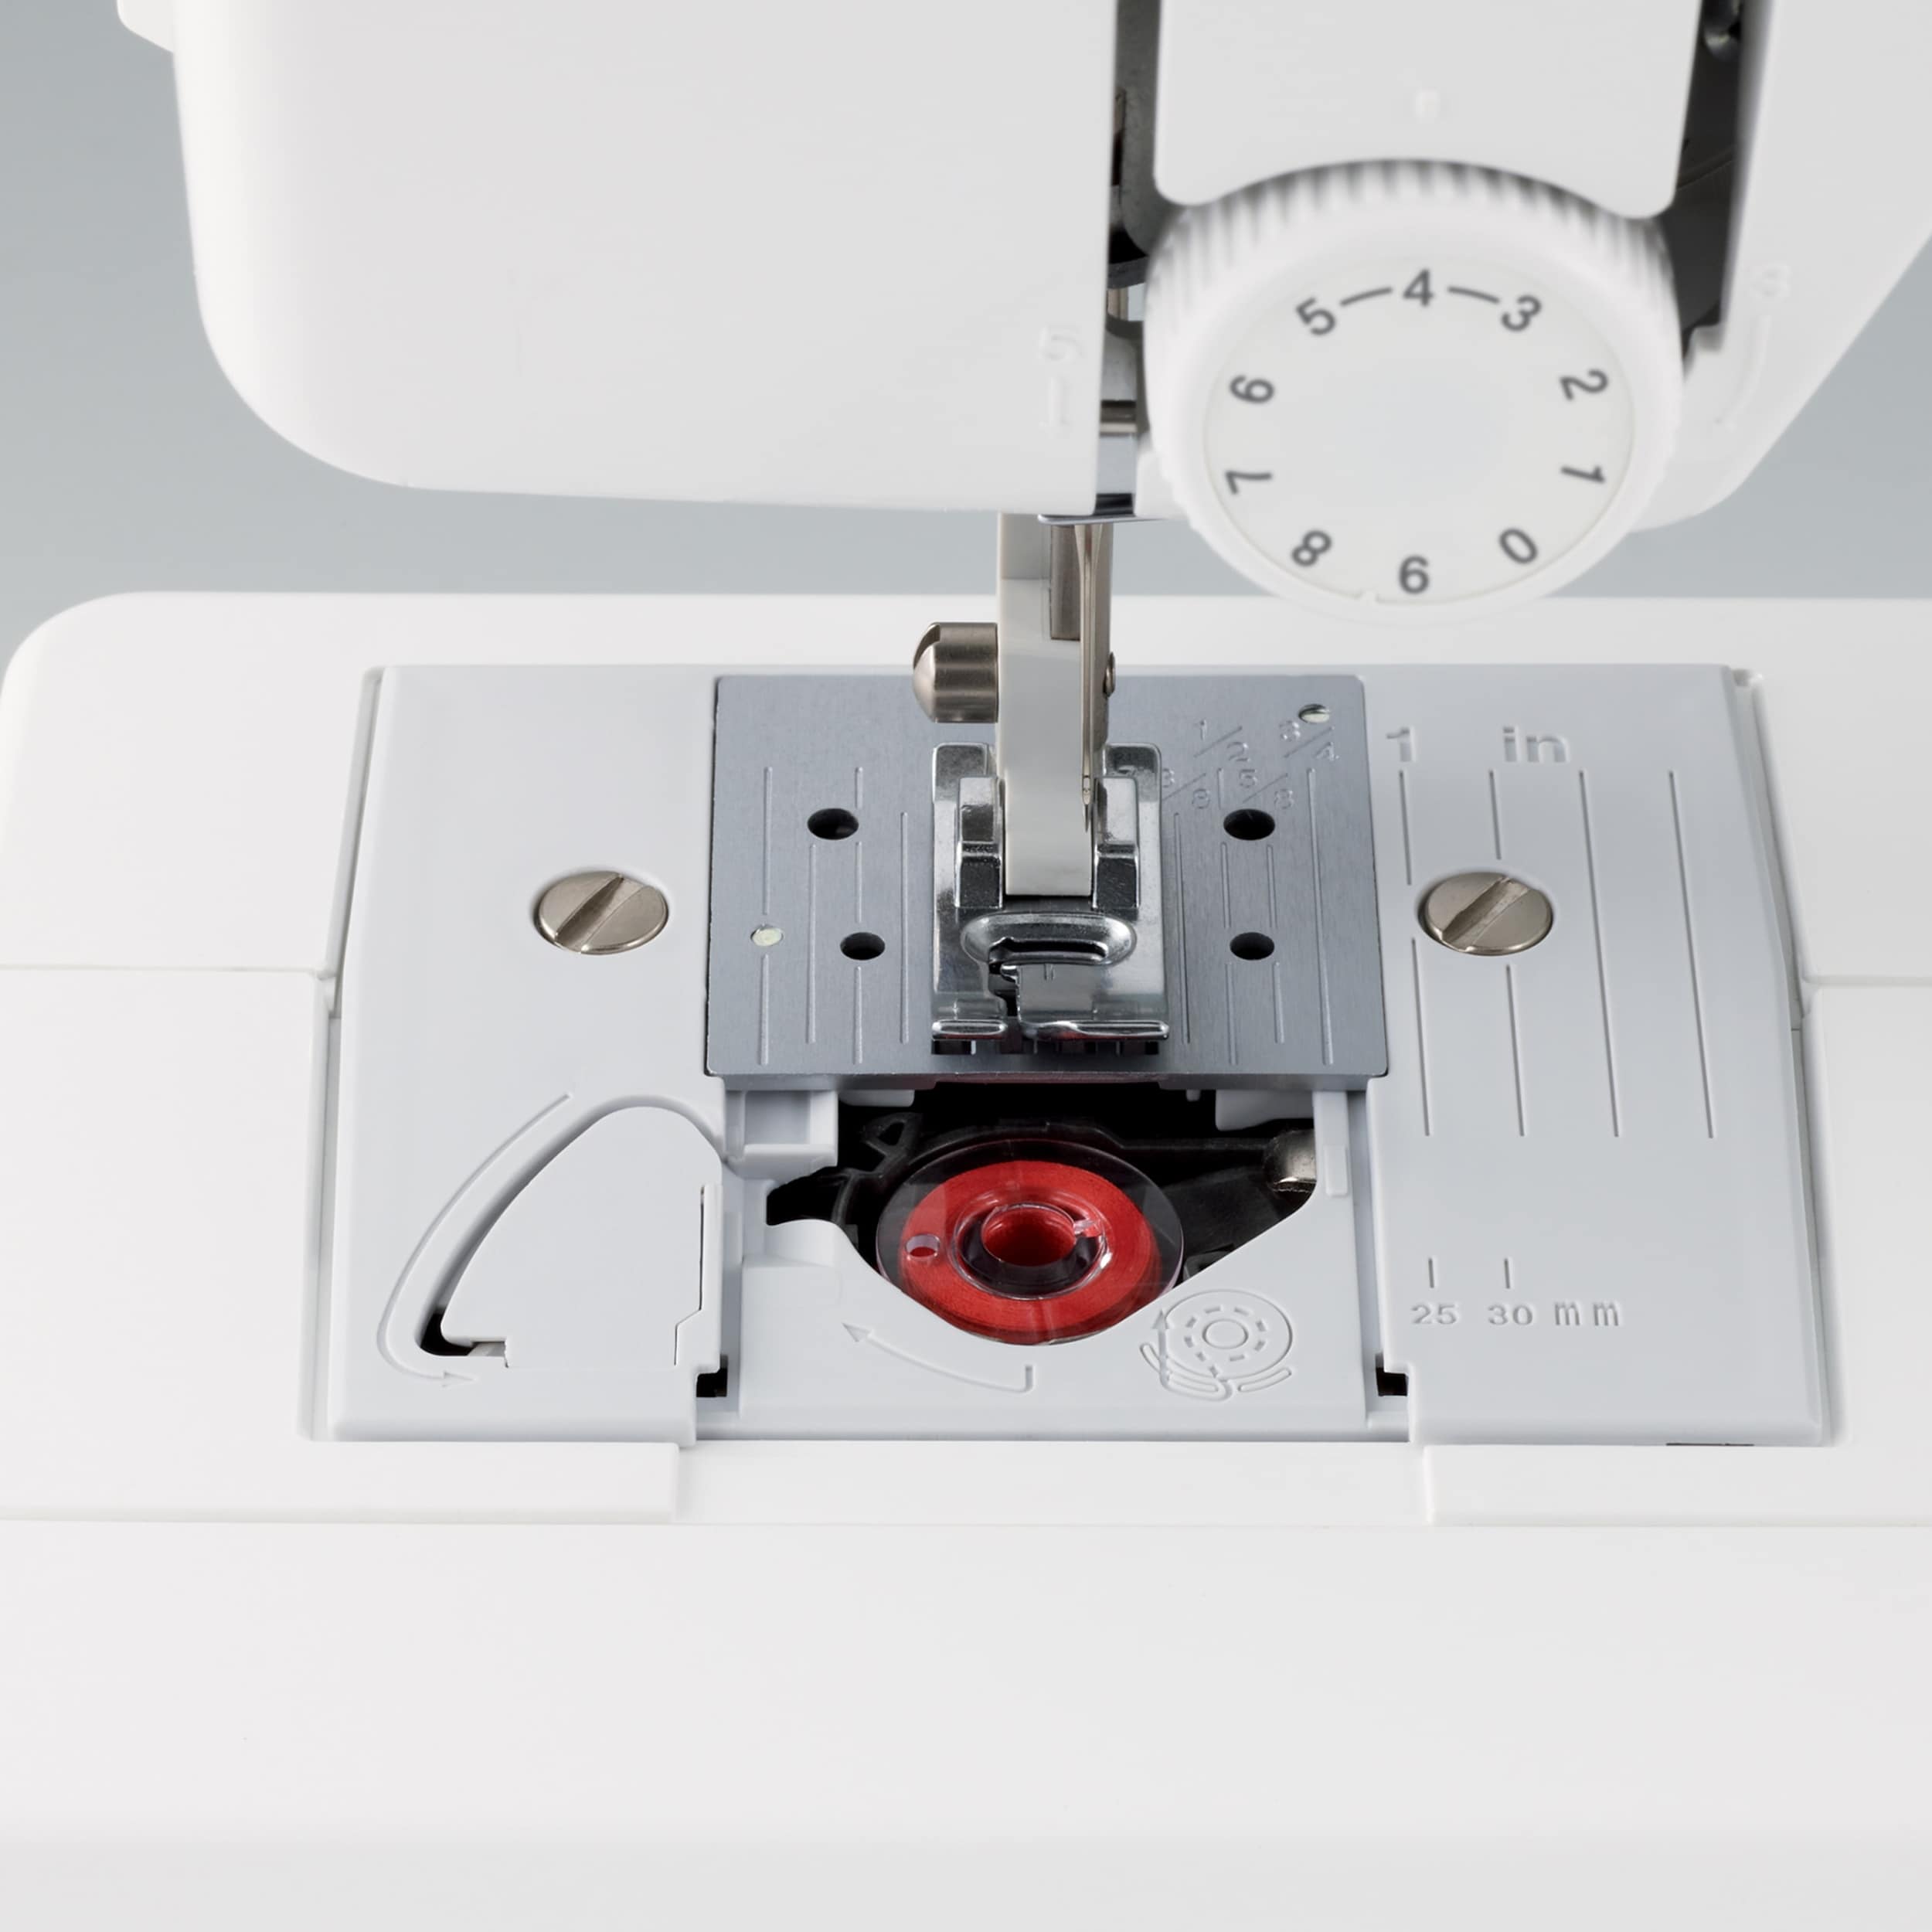 Sewing machine light Sewing Machines & Accessories at